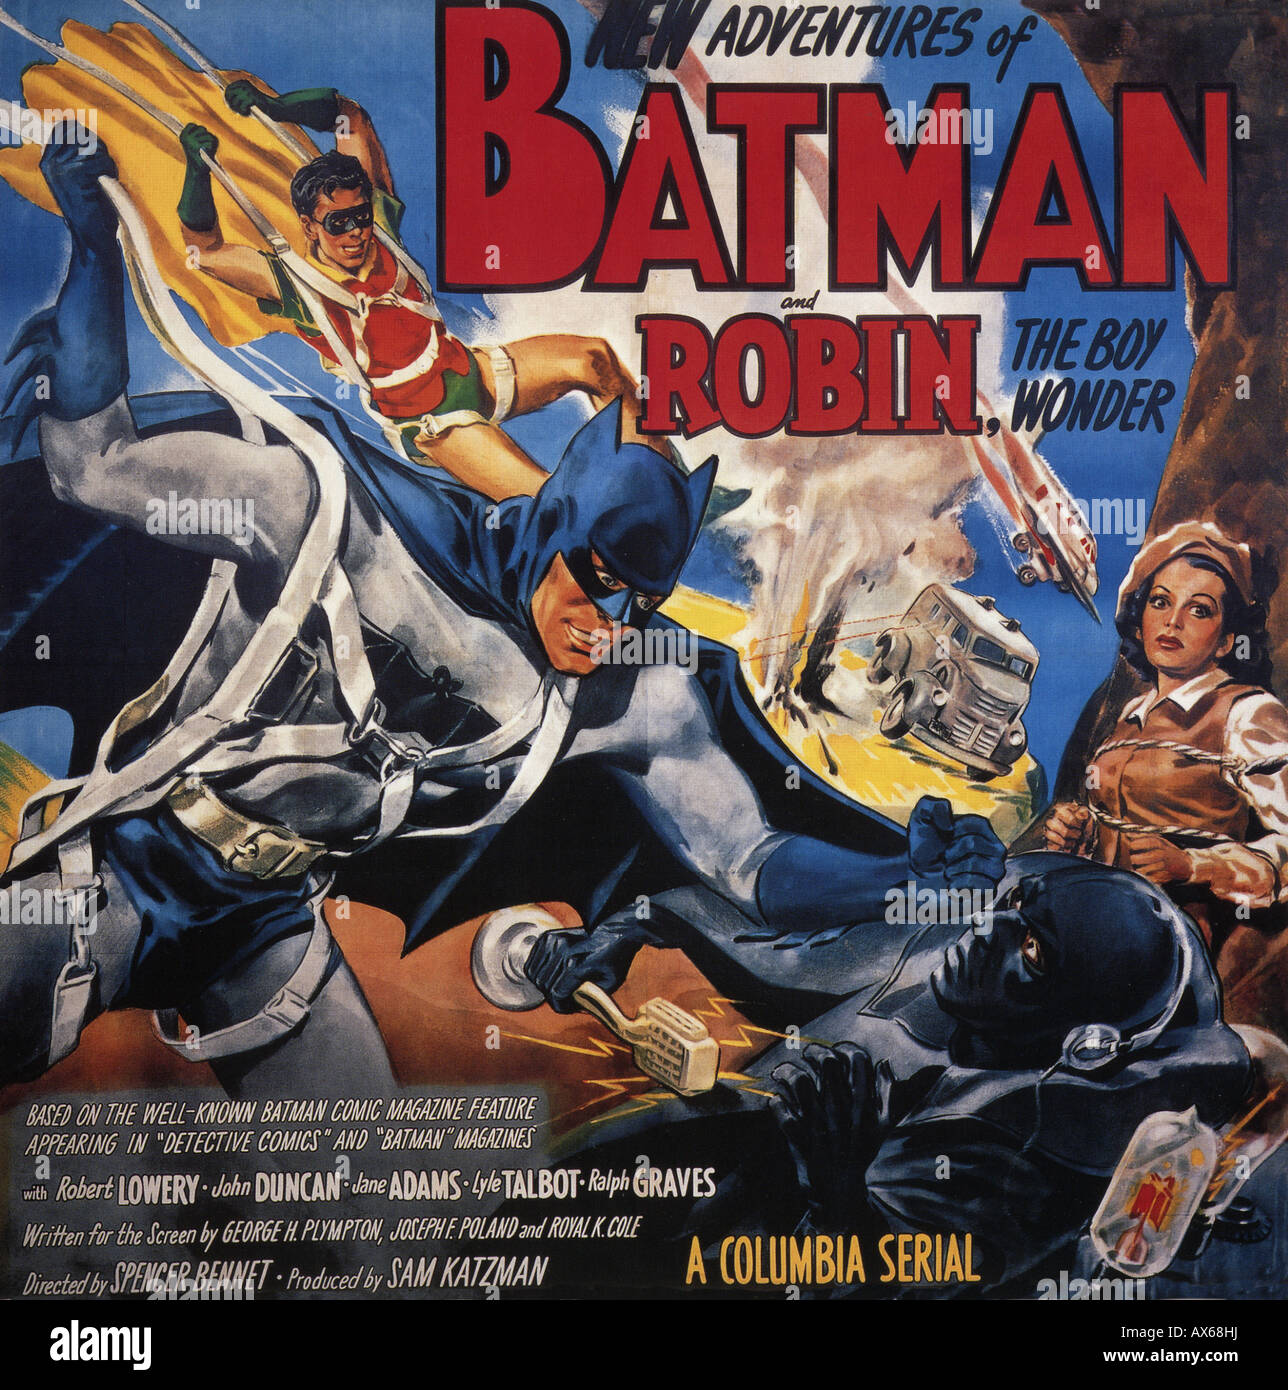 THE NEW ADVENTURES OF BATMAN AND ROBIN poster for 1949 Columbia film serial  with Robert Lowery as Batman Stock Photo - Alamy